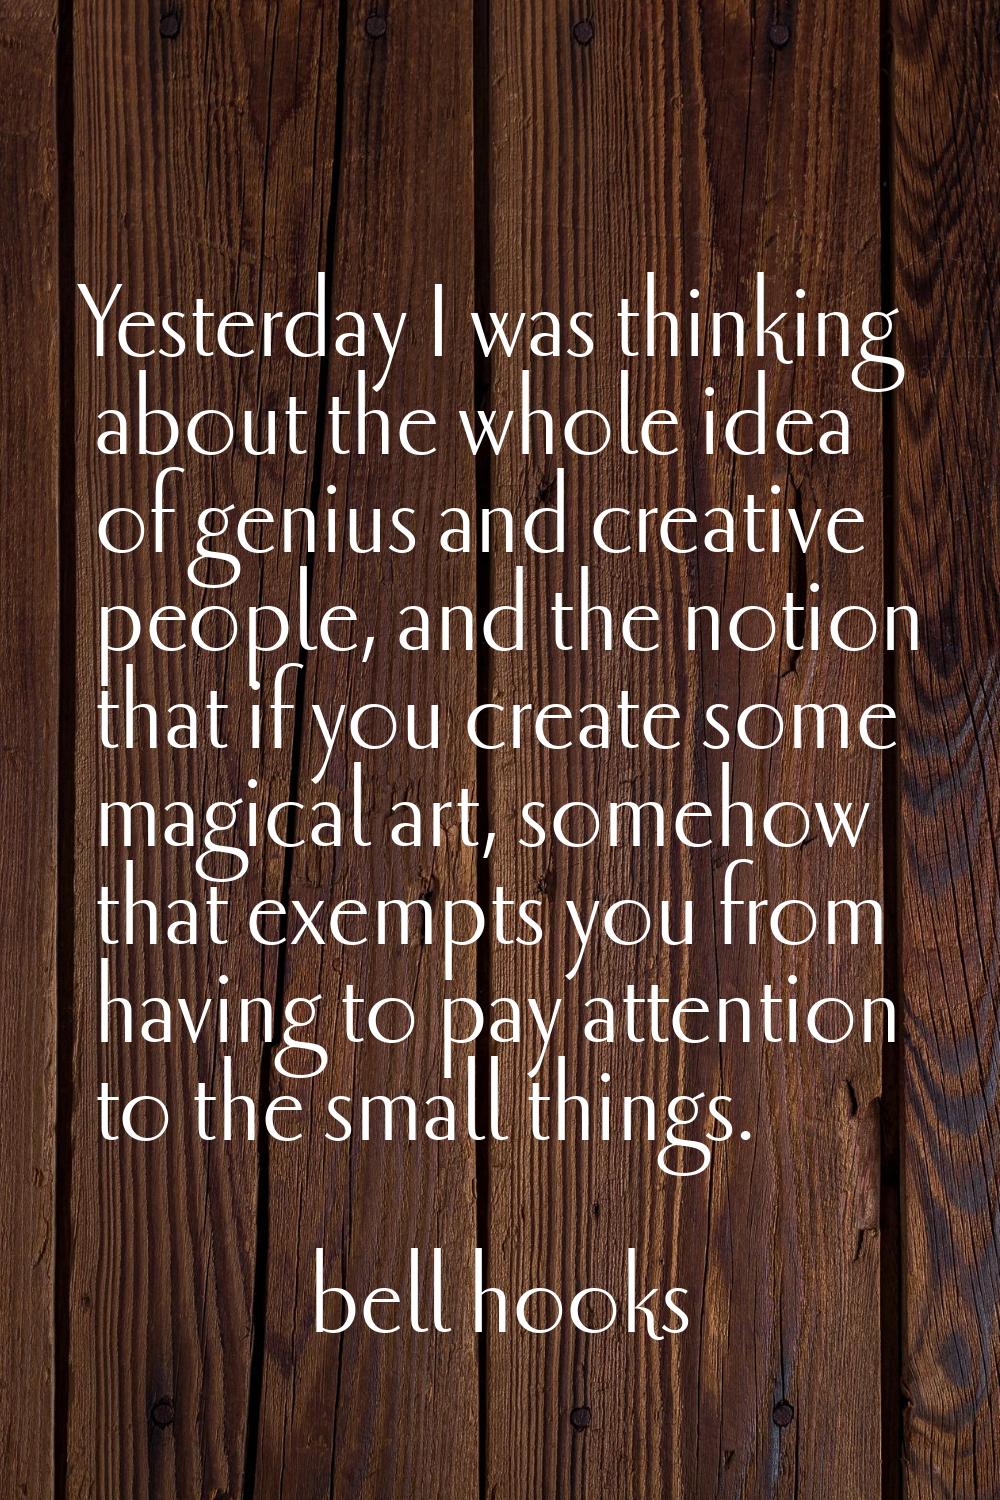 Yesterday I was thinking about the whole idea of genius and creative people, and the notion that if